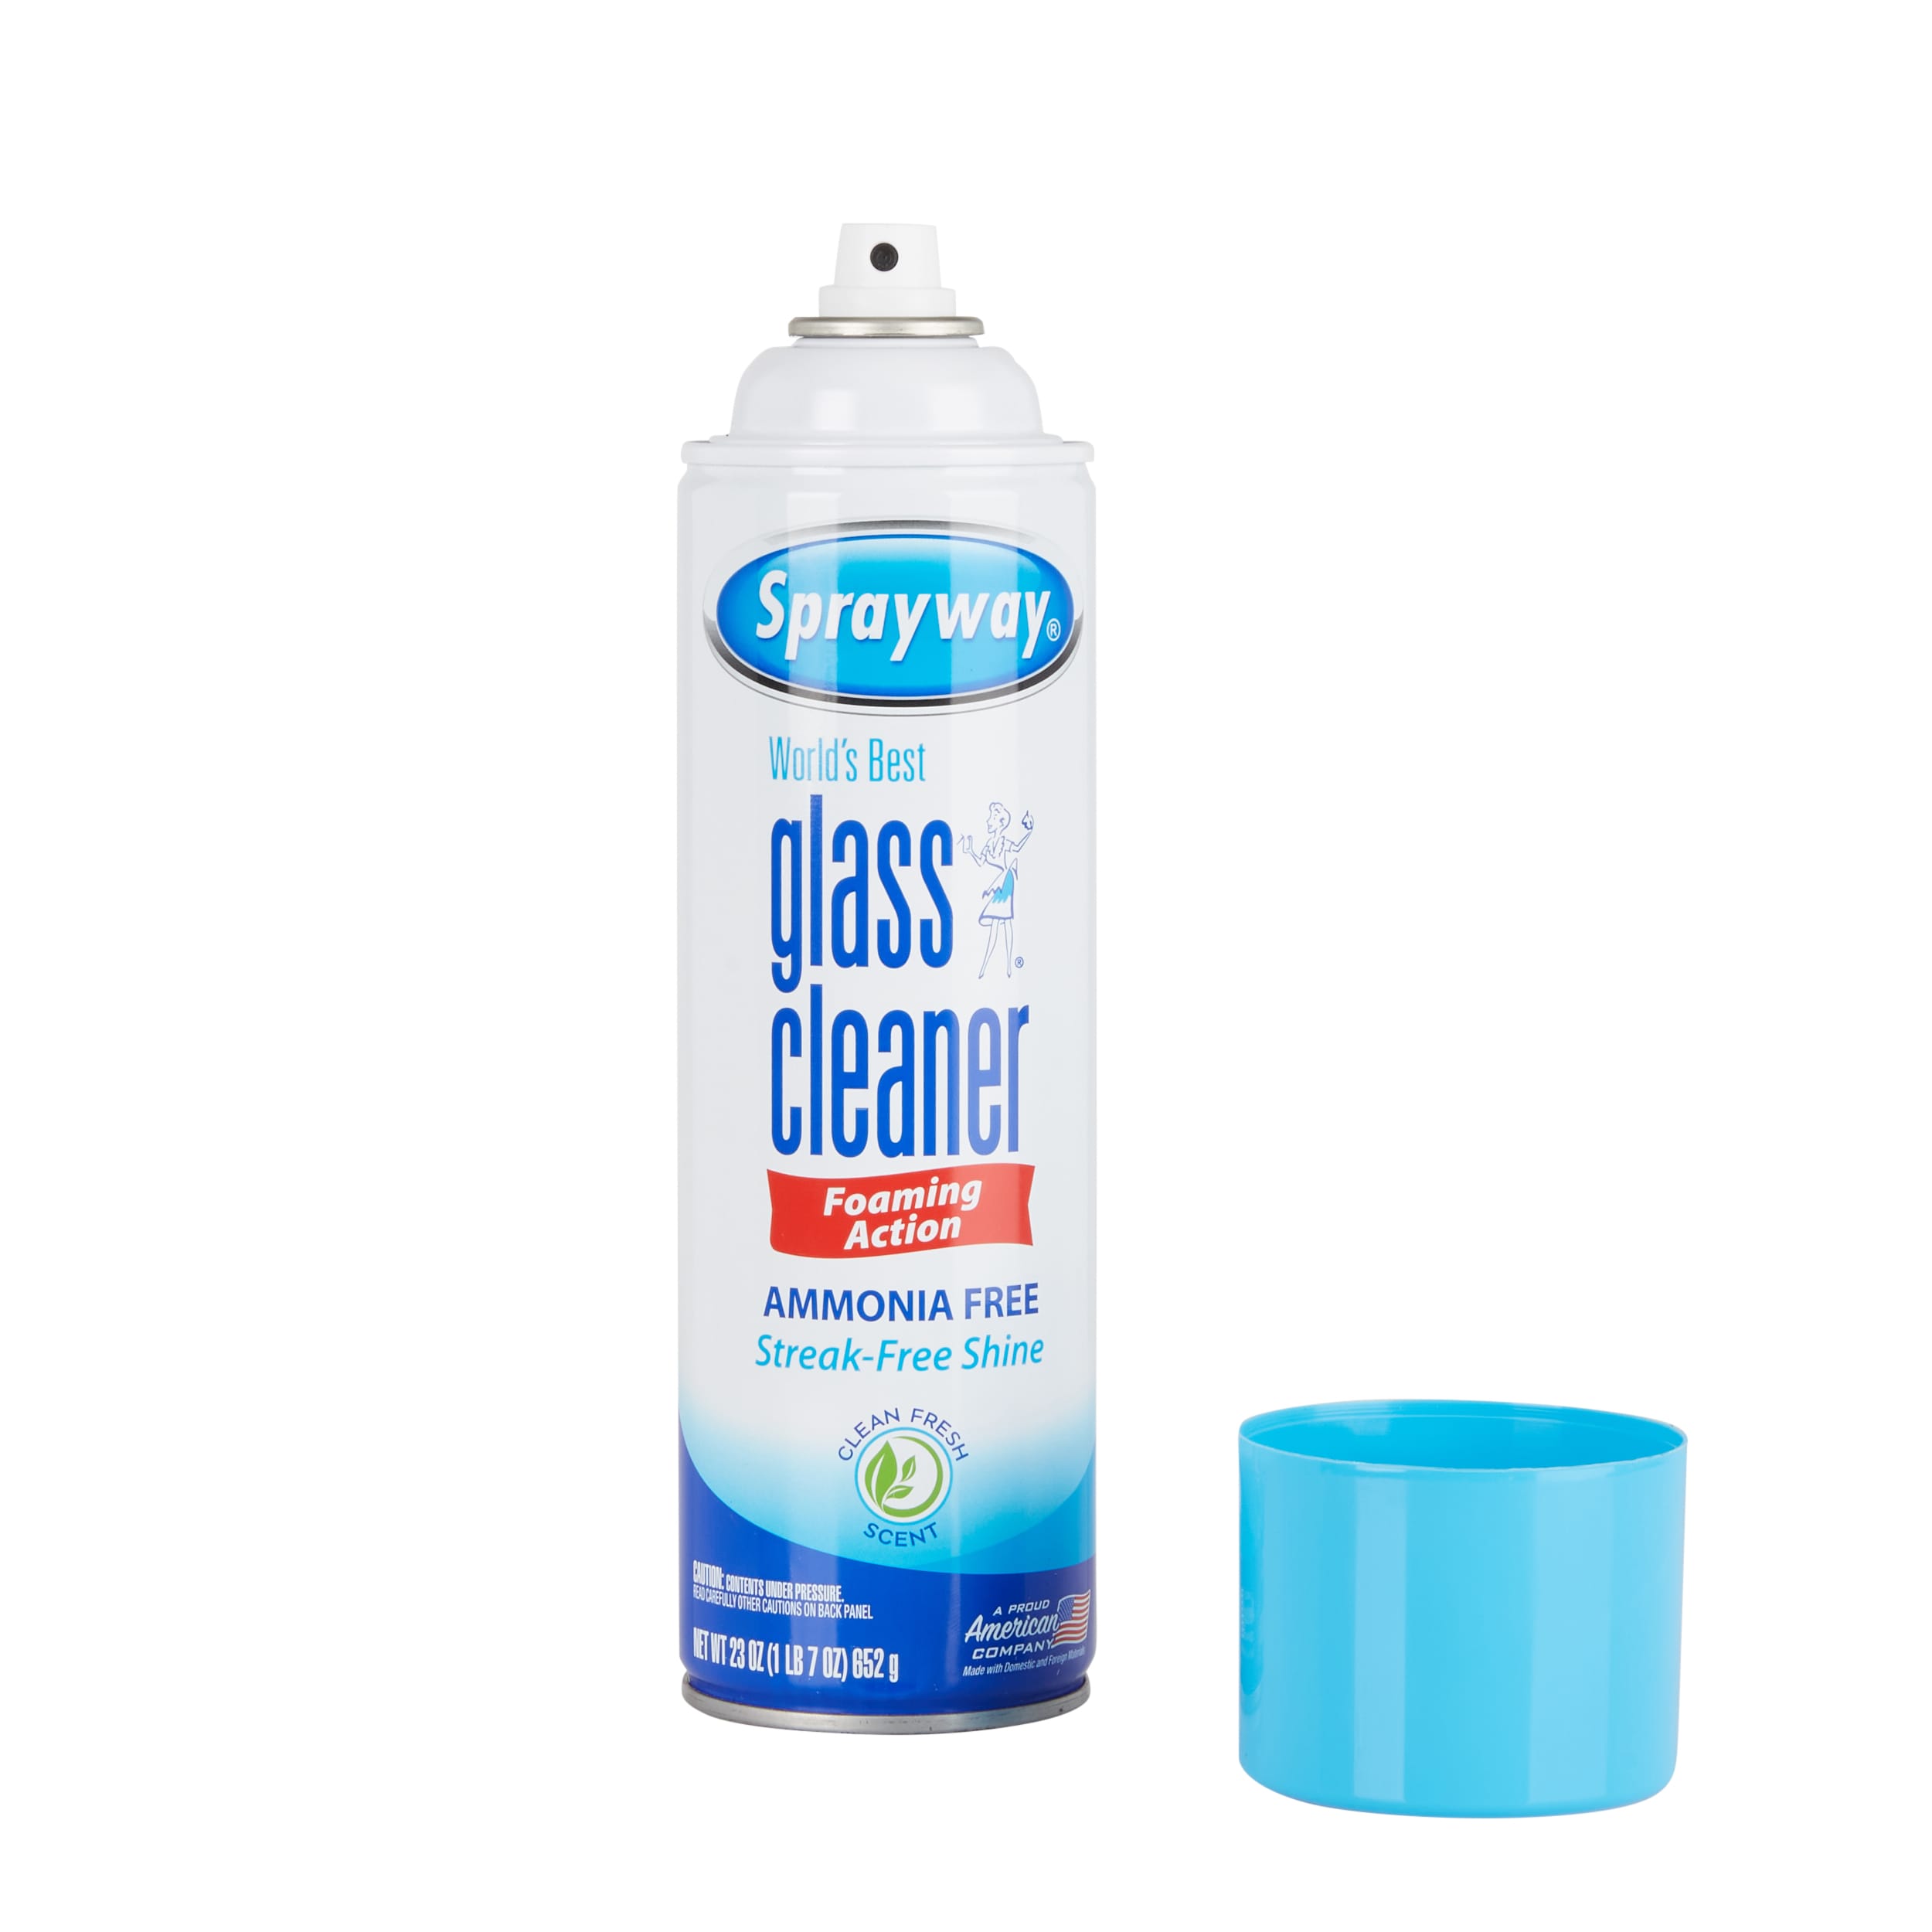 3586-6 Spray & Clean Windshield Cleaner, Inside & Out, As Seen on TV -  Quantity 1